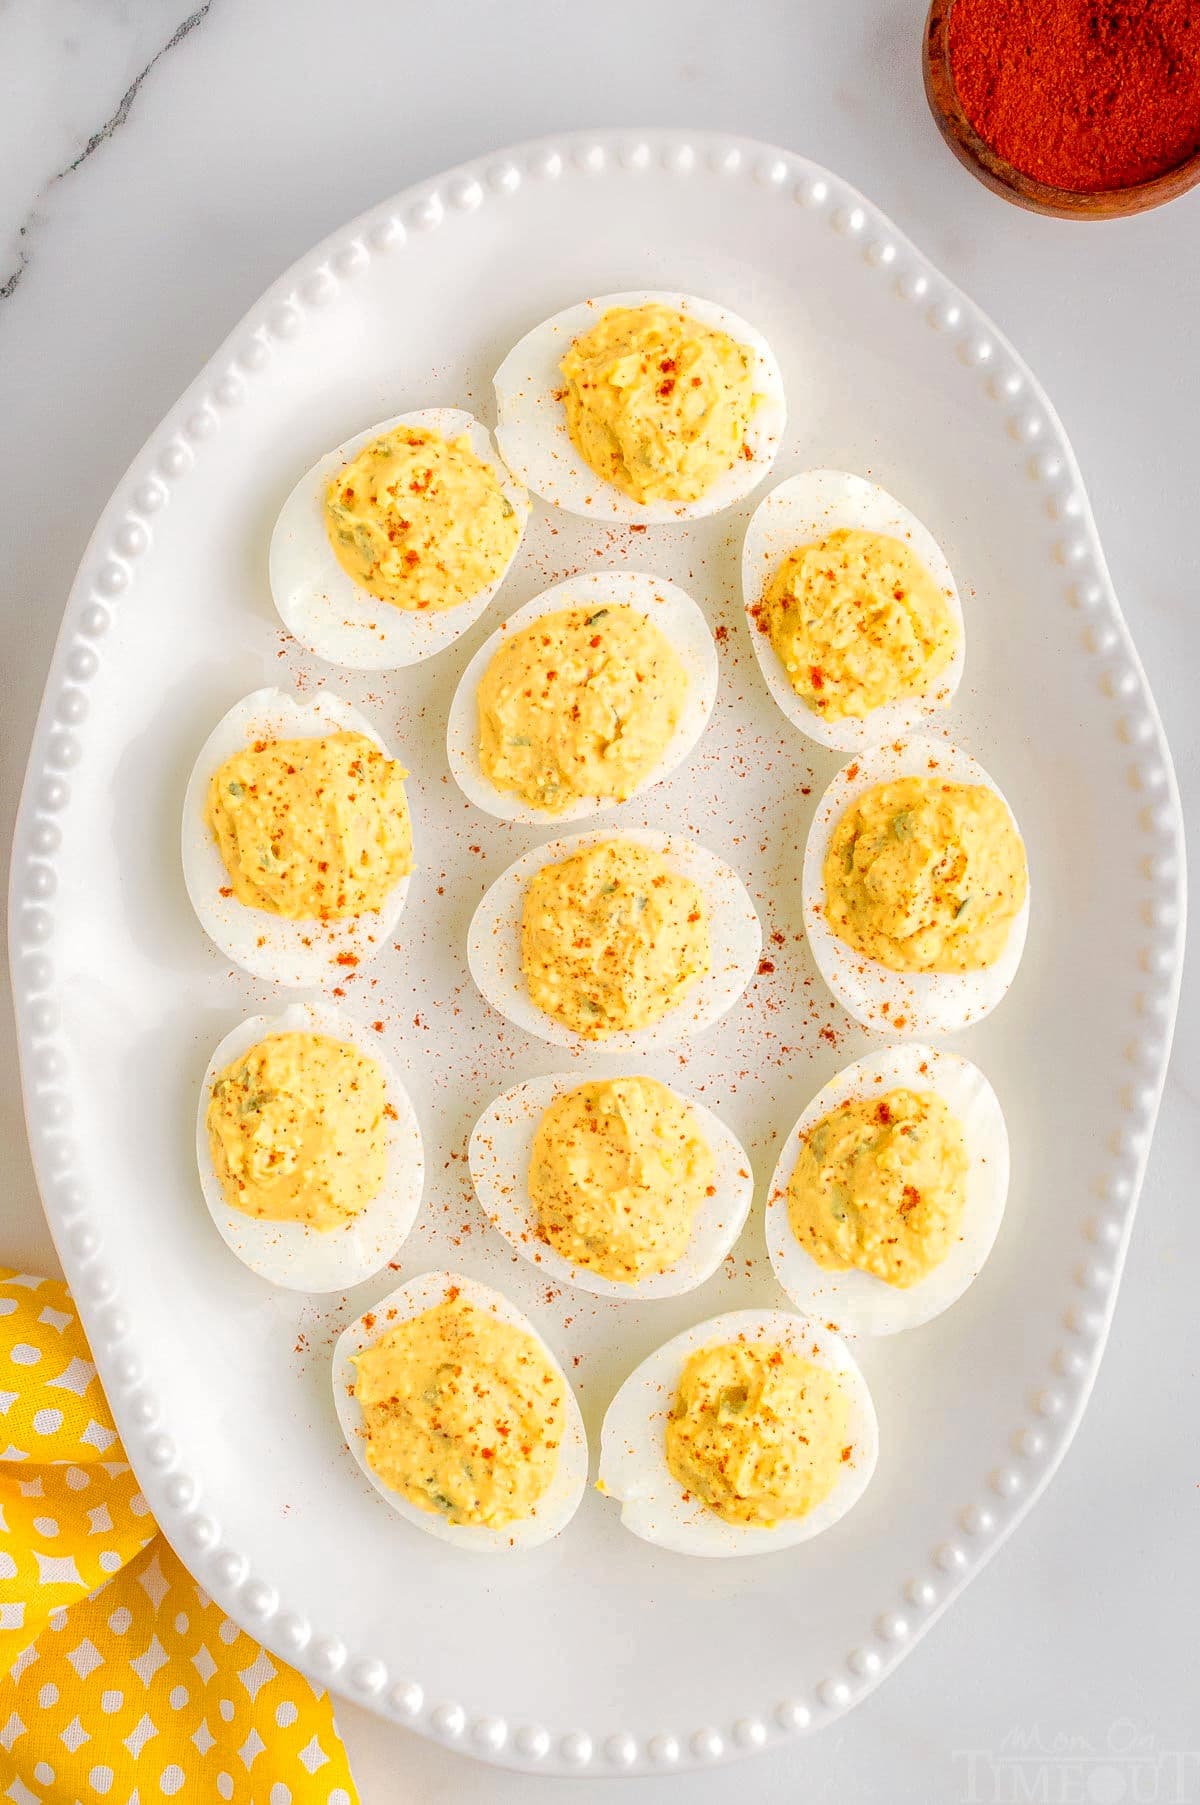 rimmed white serving tray with 12 deviled eggs on it. Eggs have been garnished with paprika and there is a yellow napkin in the corner.